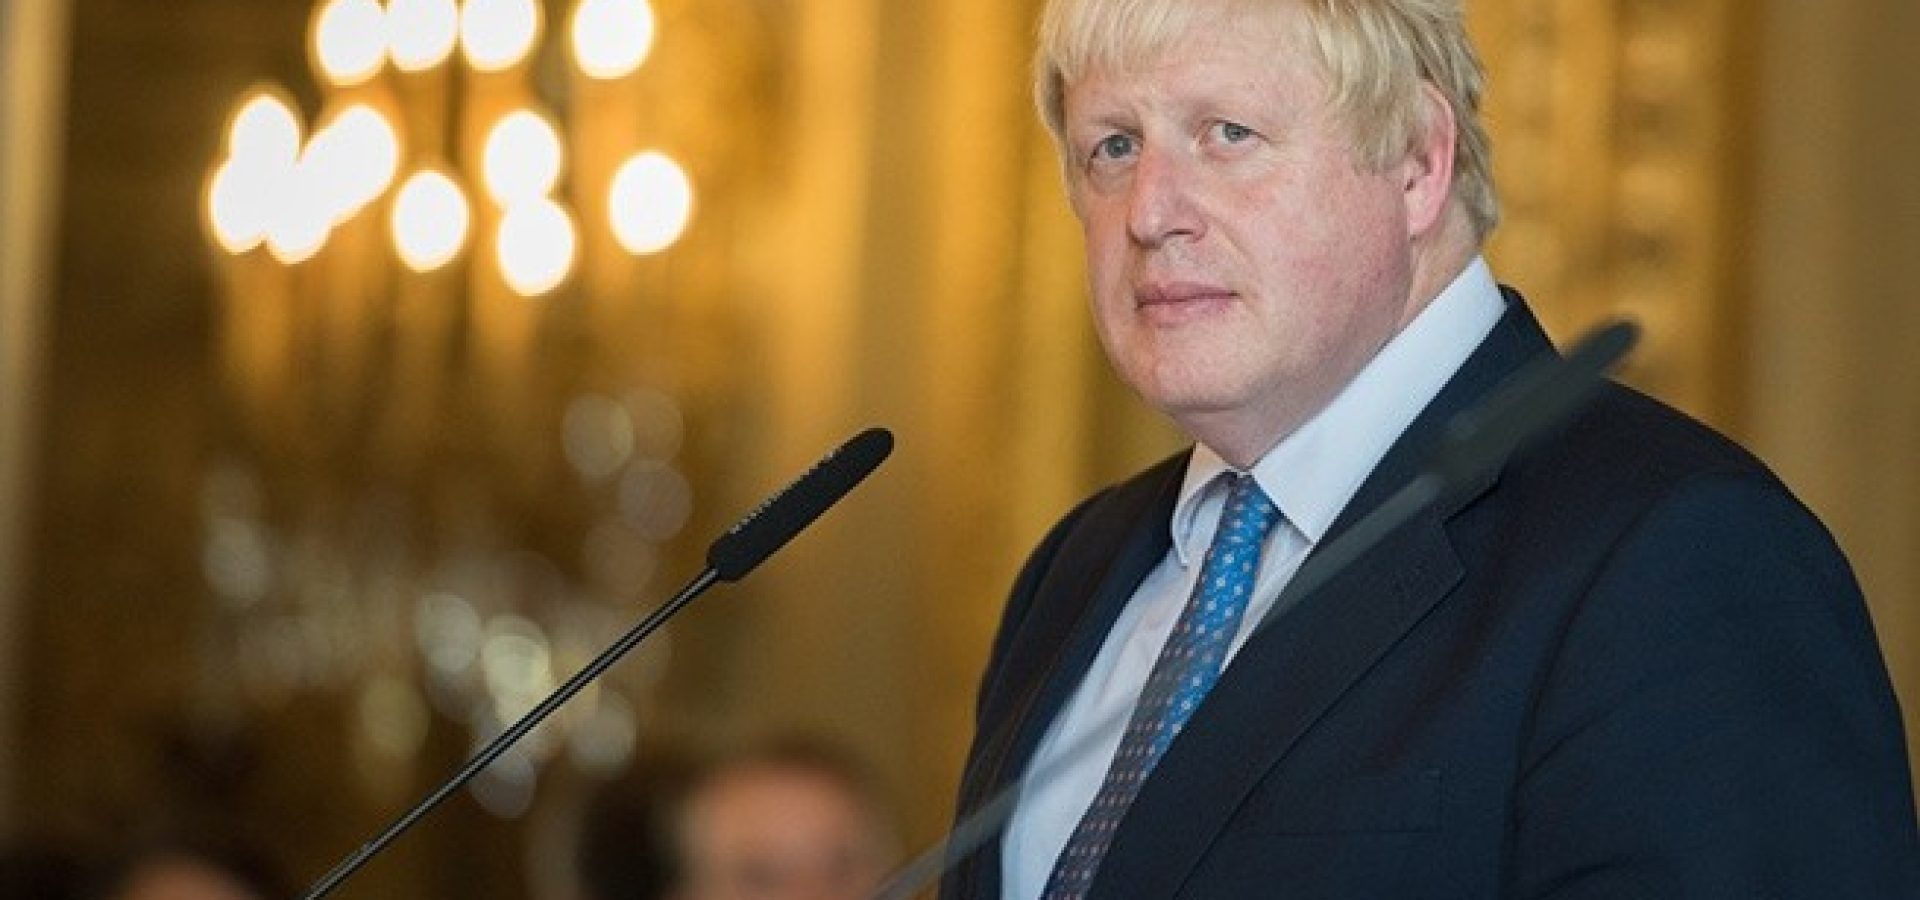 Wibest – Brexit: British Prime Minister Boris Johnson standing in front of a podium.